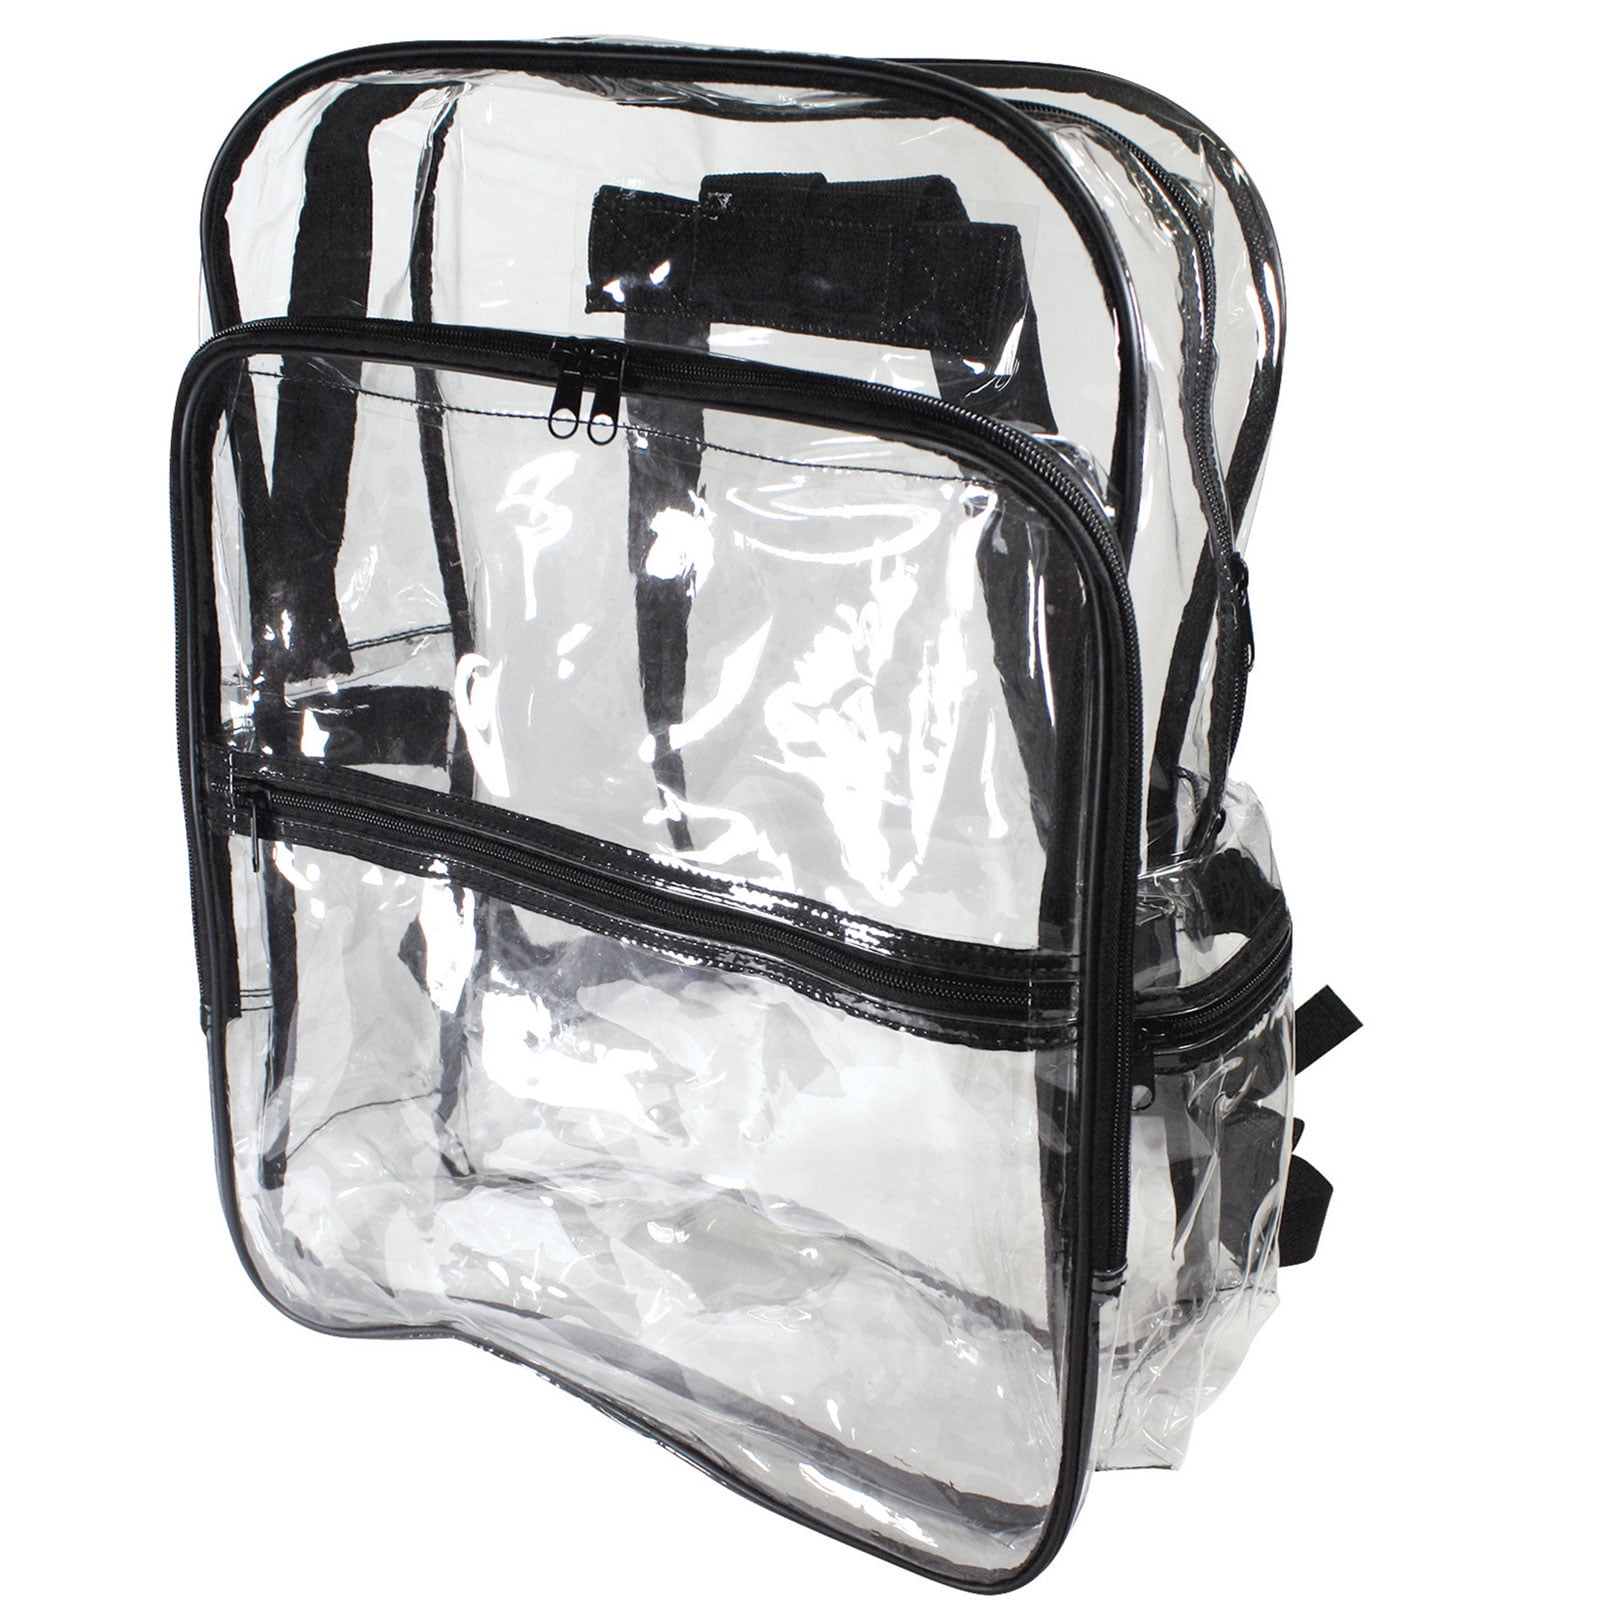 Clear Backpack Mini Stadium Approved Security Travel Cold-Resistant See Through Backpack Water proof Transparent Backpack for Work Concert /& Sport Event